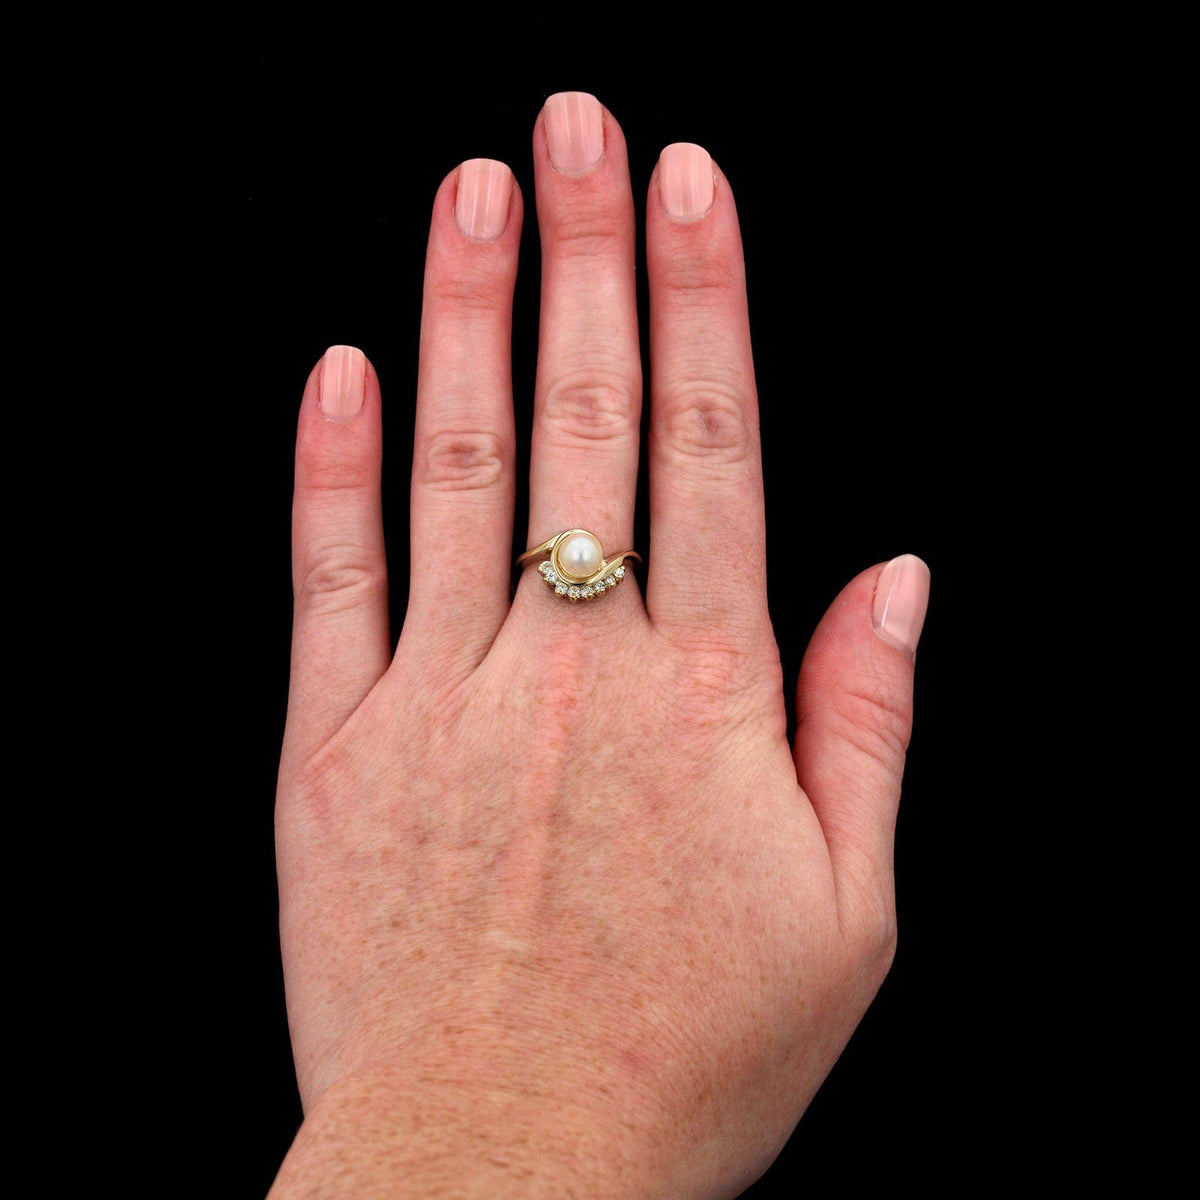 14K Yellow Gold Estate Cultured Pearl and Diamond Ring